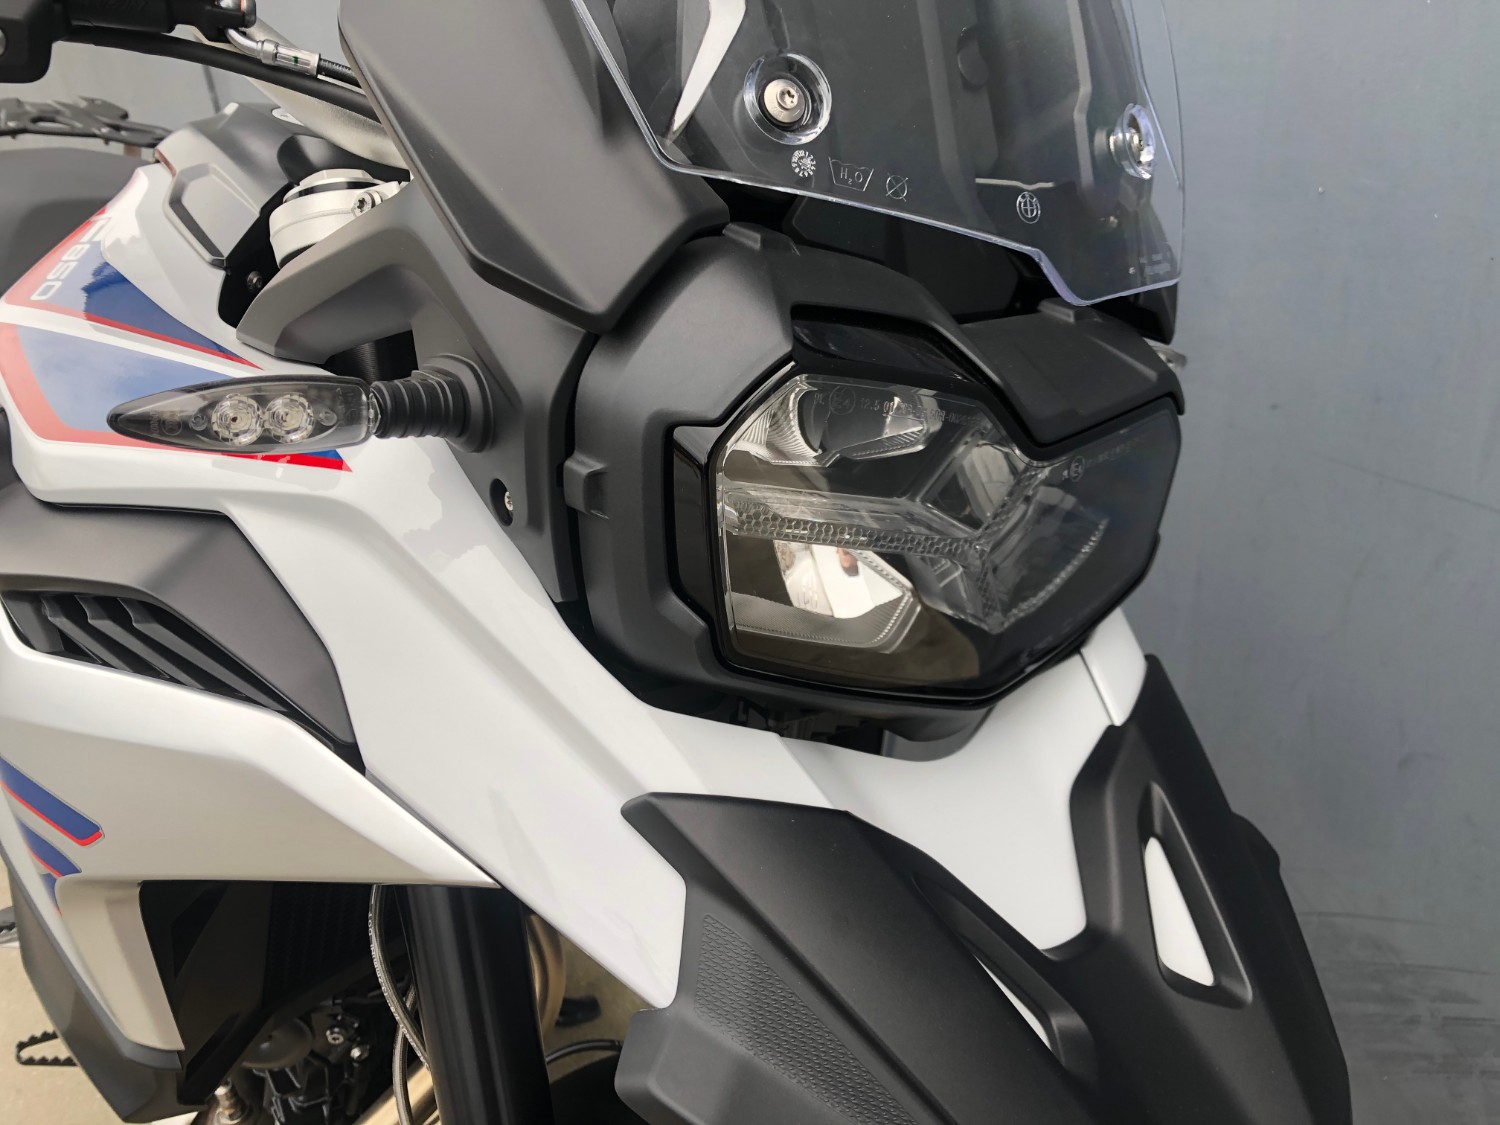 2019 BMW F850GS RallyE Low Suspension Motorcycle Image 27